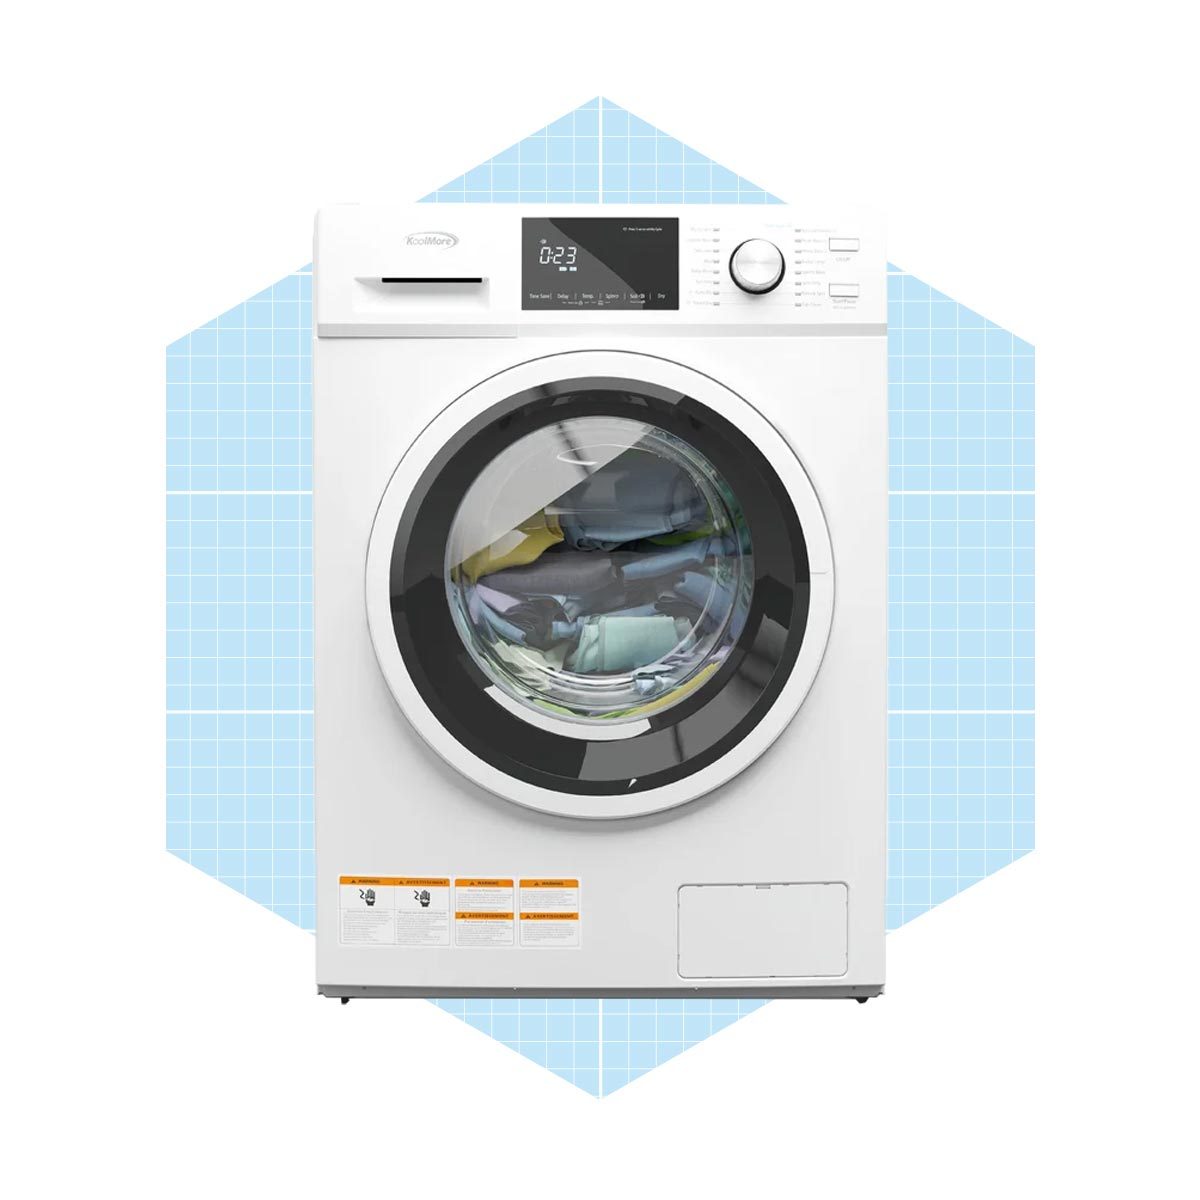 8 Best Washer And Dryers For An Apartment In 2023 KoolMore 2 In 1 Front Load Washer And Dryer Combo Ecomm Via Wayfair.com  ?fit=700%2C700